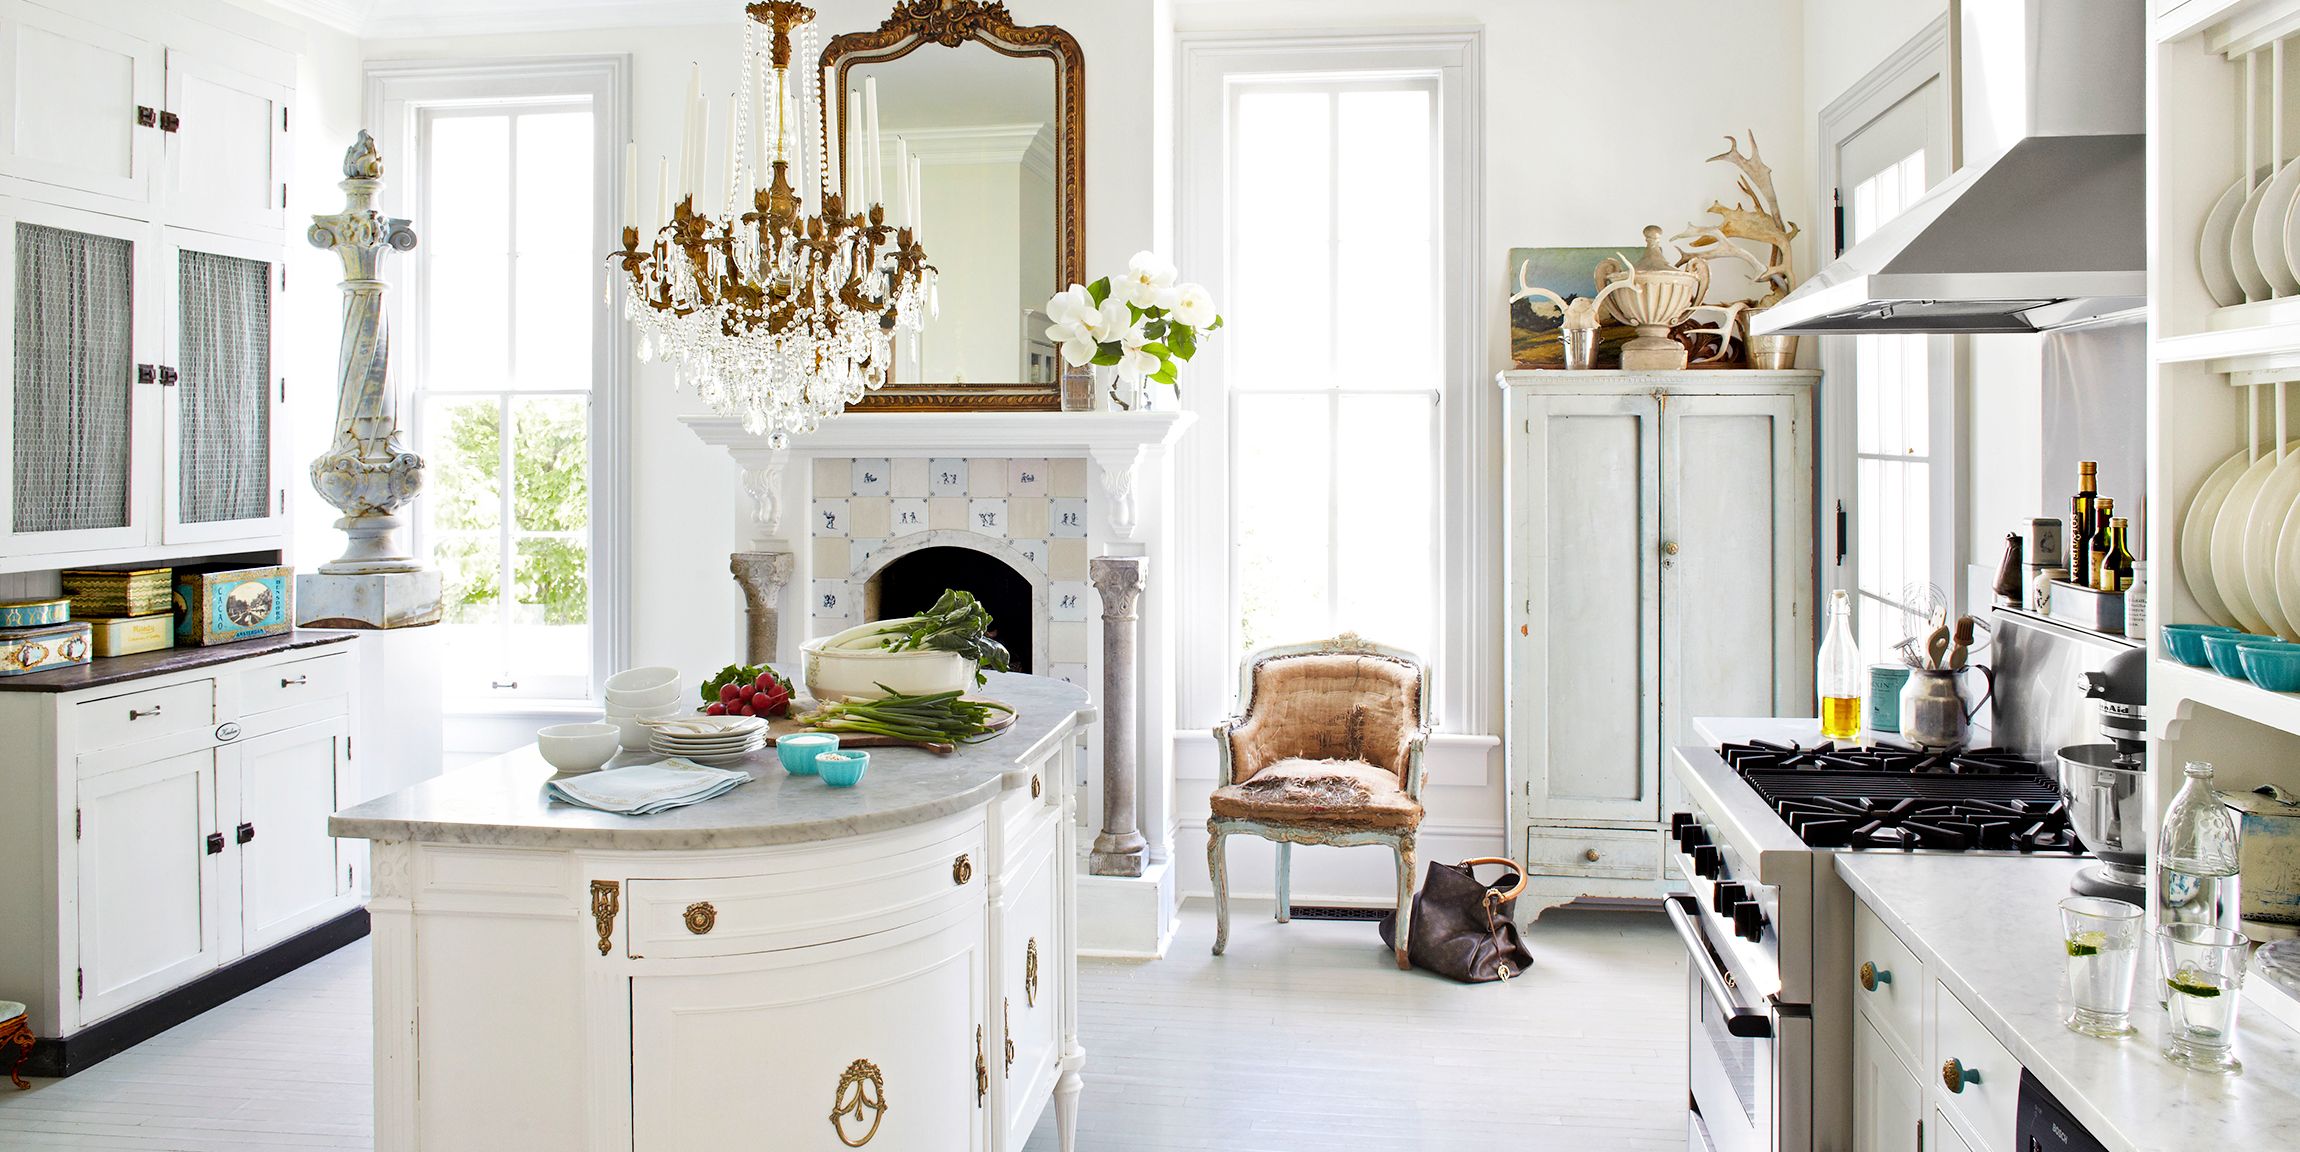 French country kitchen ideas – 60 effortlessly chic spaces to fall in love with